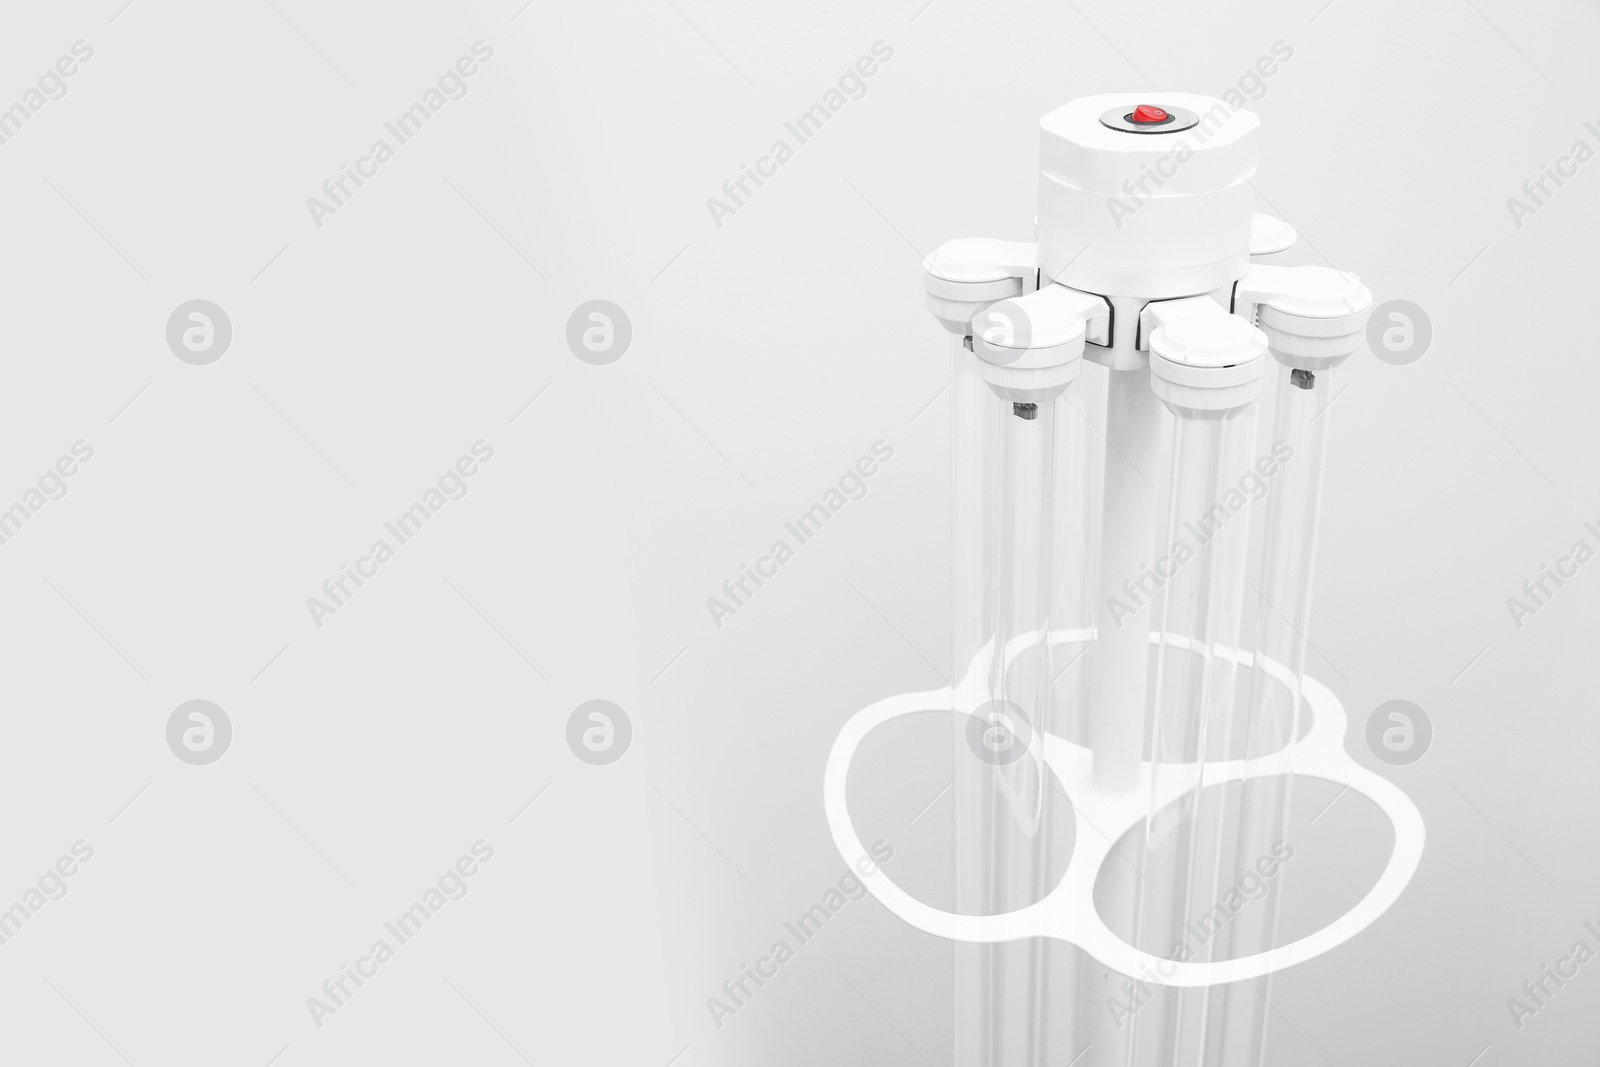 Photo of Hospital UV disinfection quartz lamps on light background, space for text